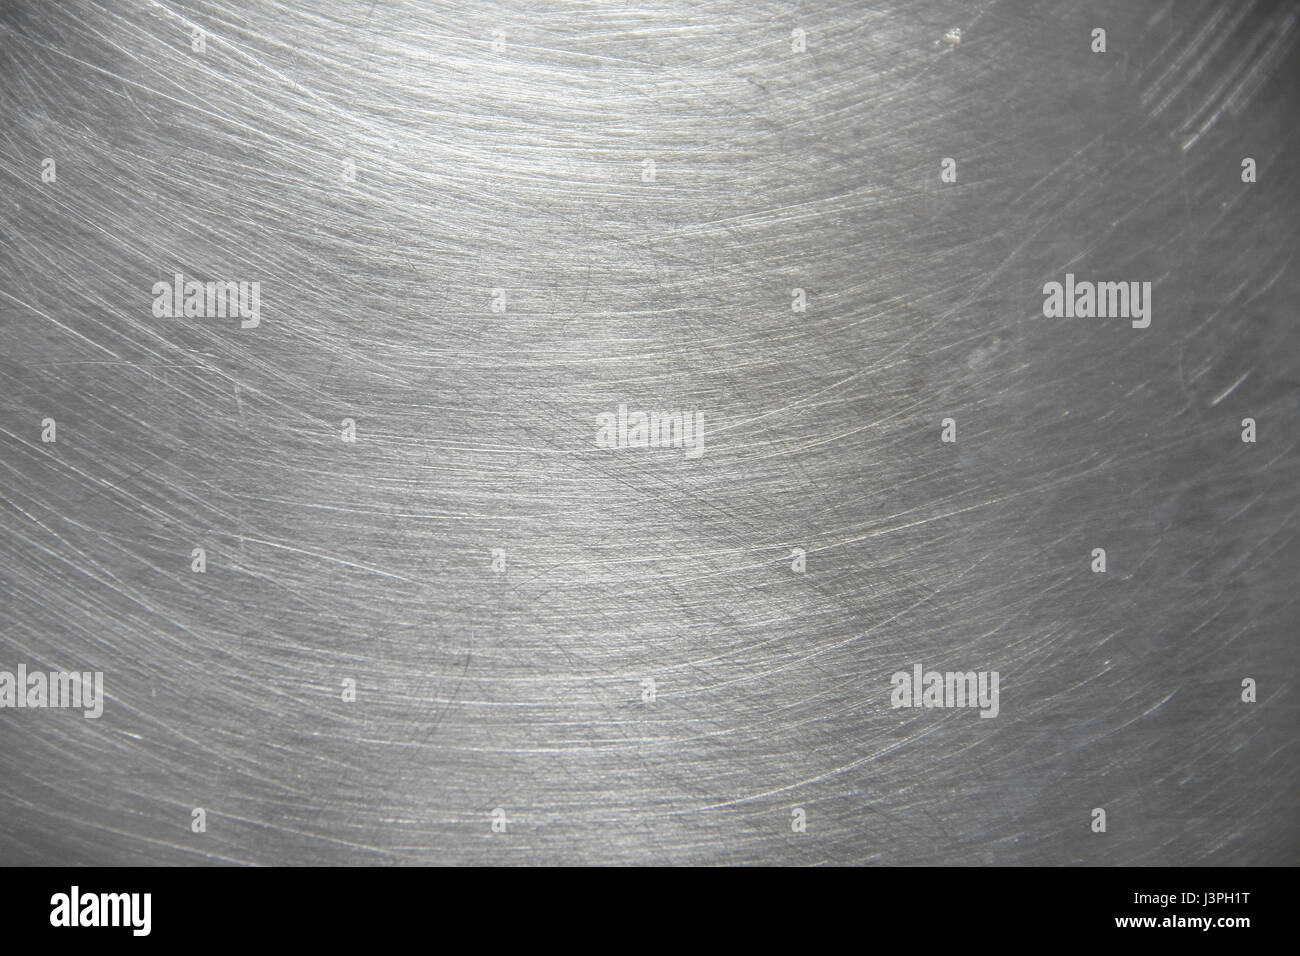 texture of aluminium pot with messy scratch and light reflex Stock Photo